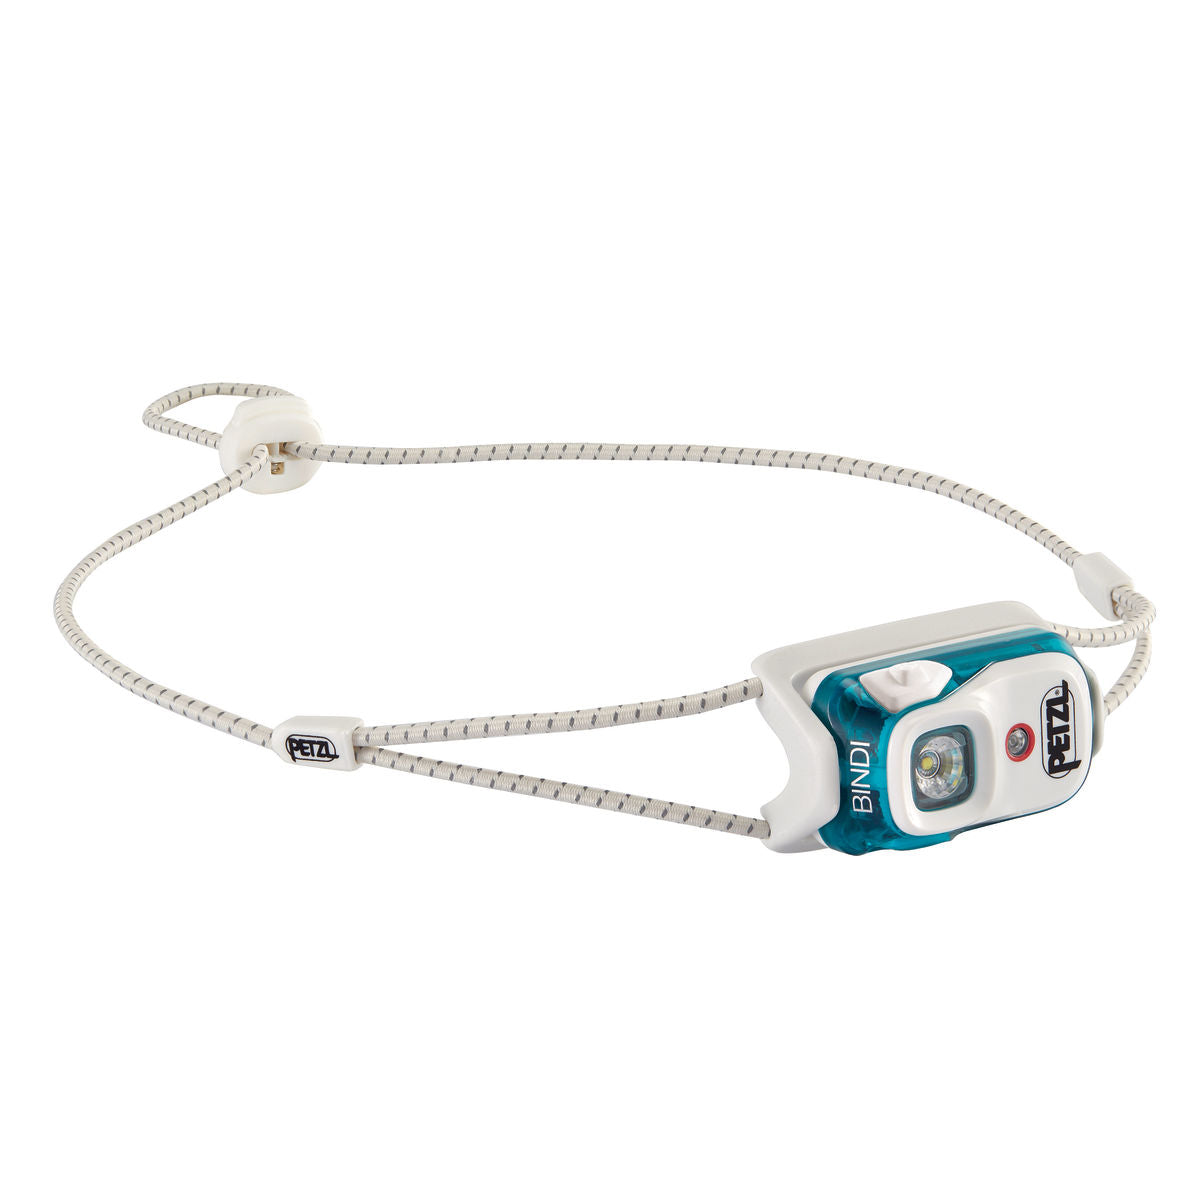 Petzl Bindi headlamp in turquoise colour with grey strap